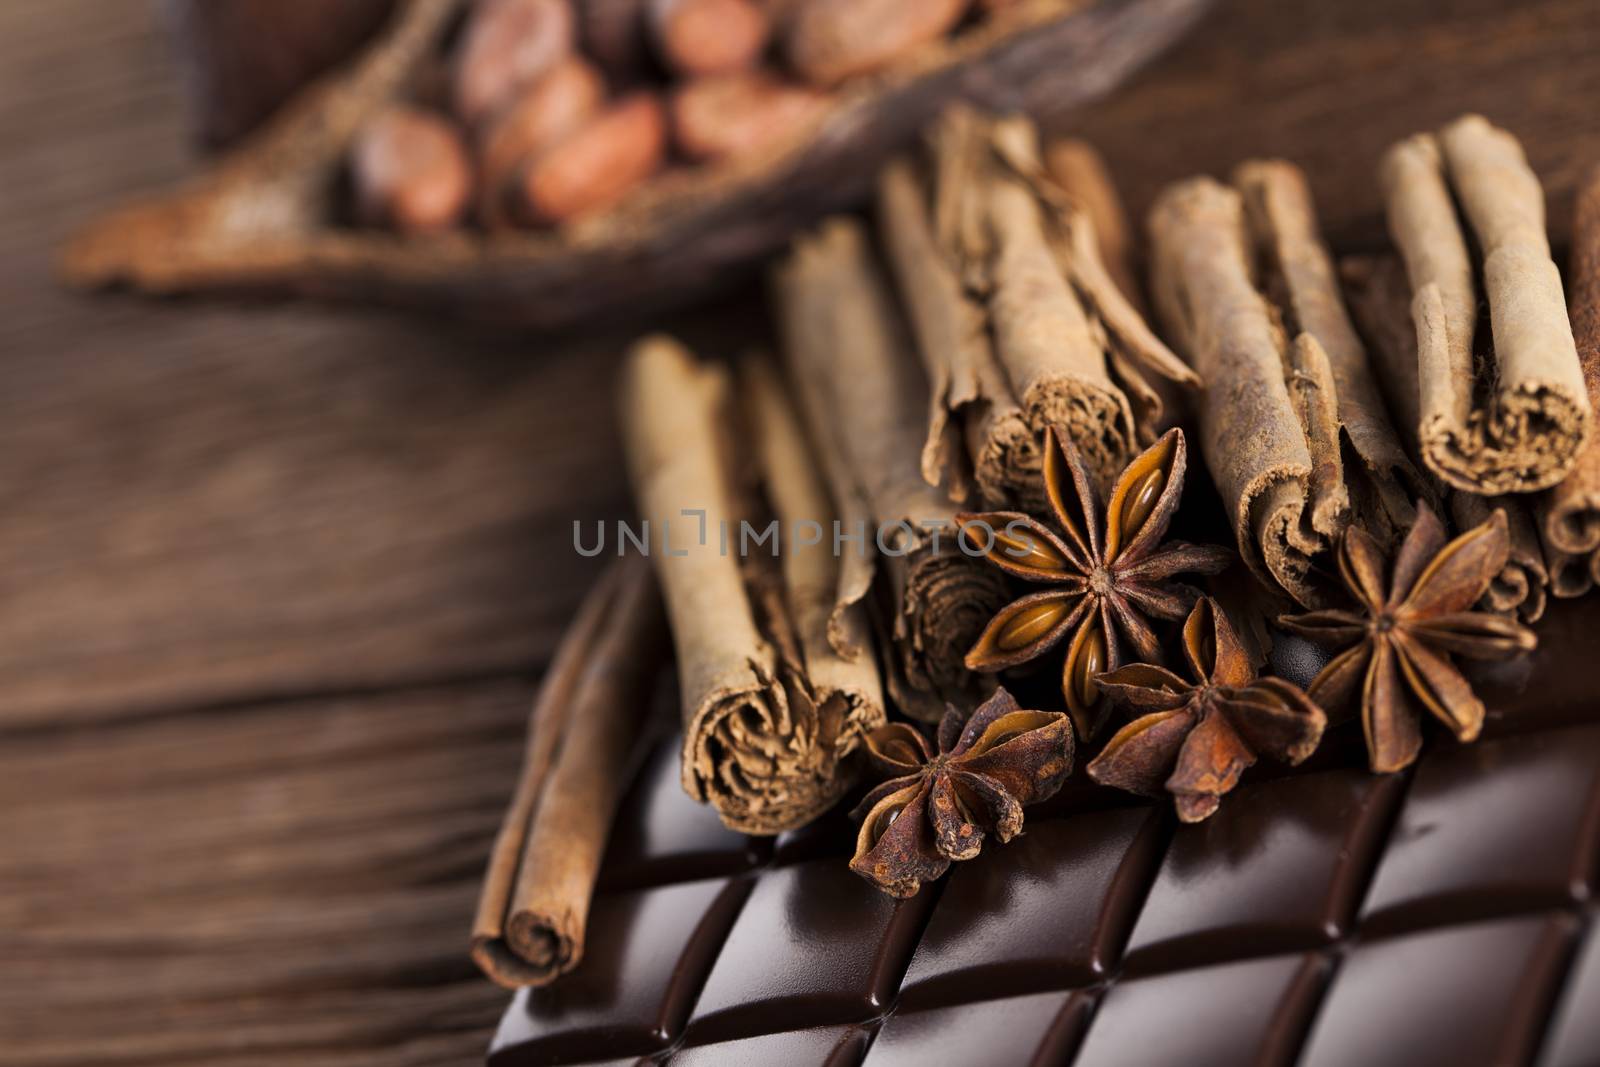 Bars Chocolate , candy sweet, dessert food on wooden background